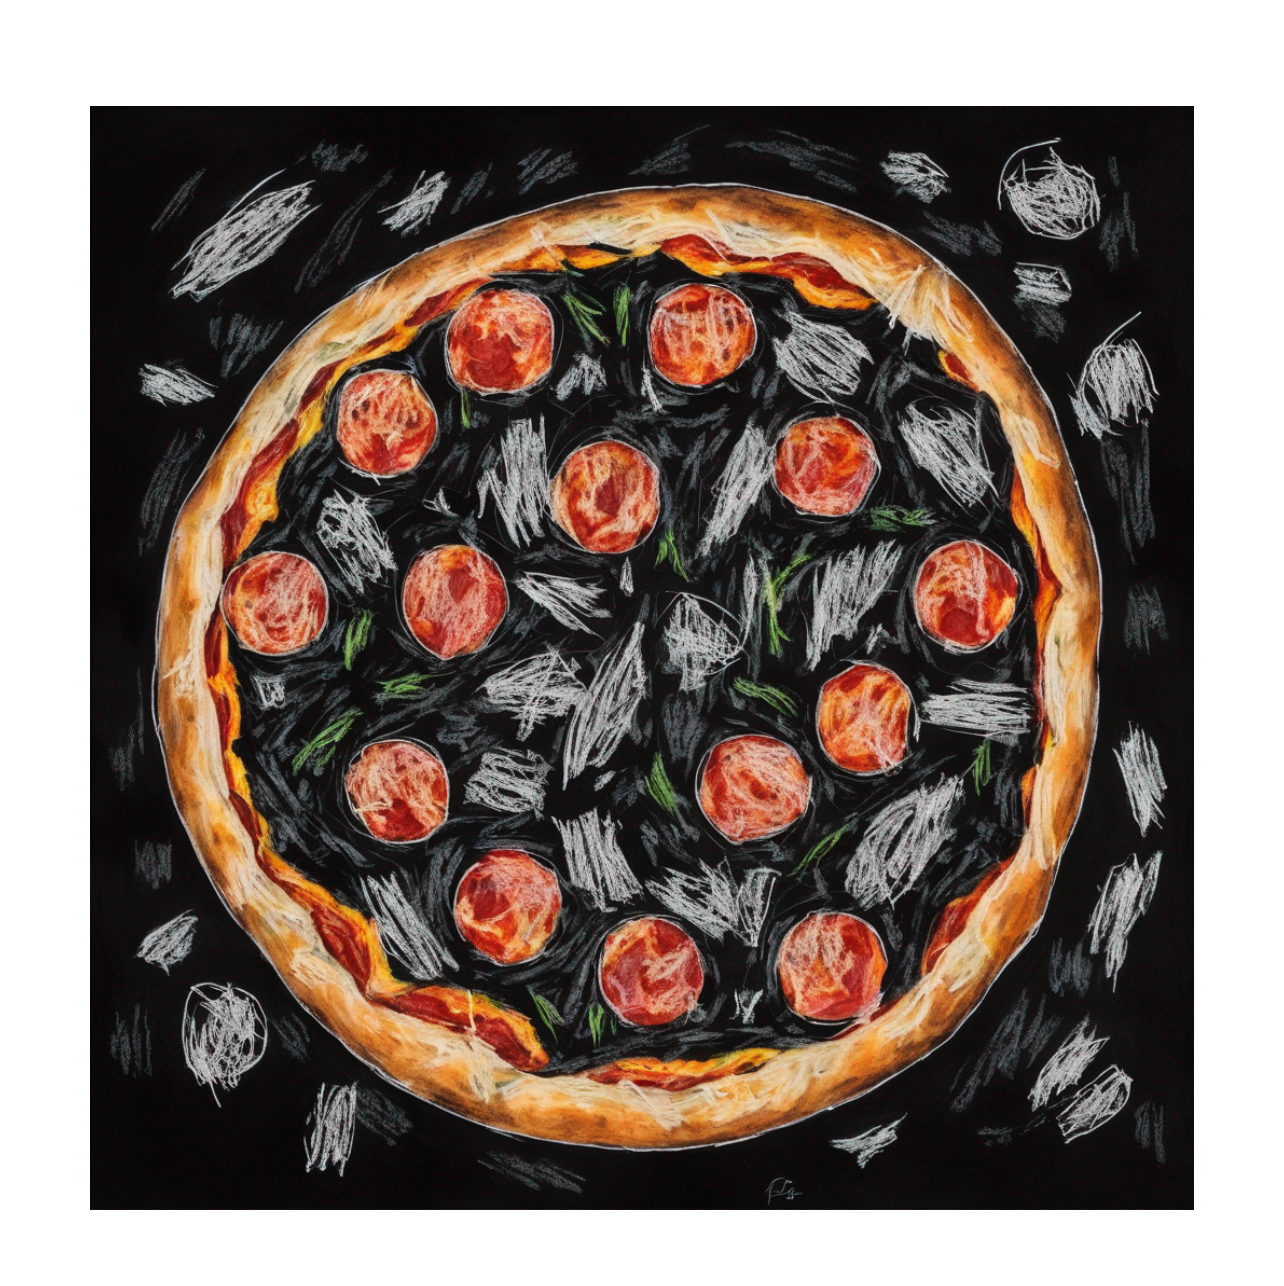 Illustration of a pepperoni pizza with scattered toppings